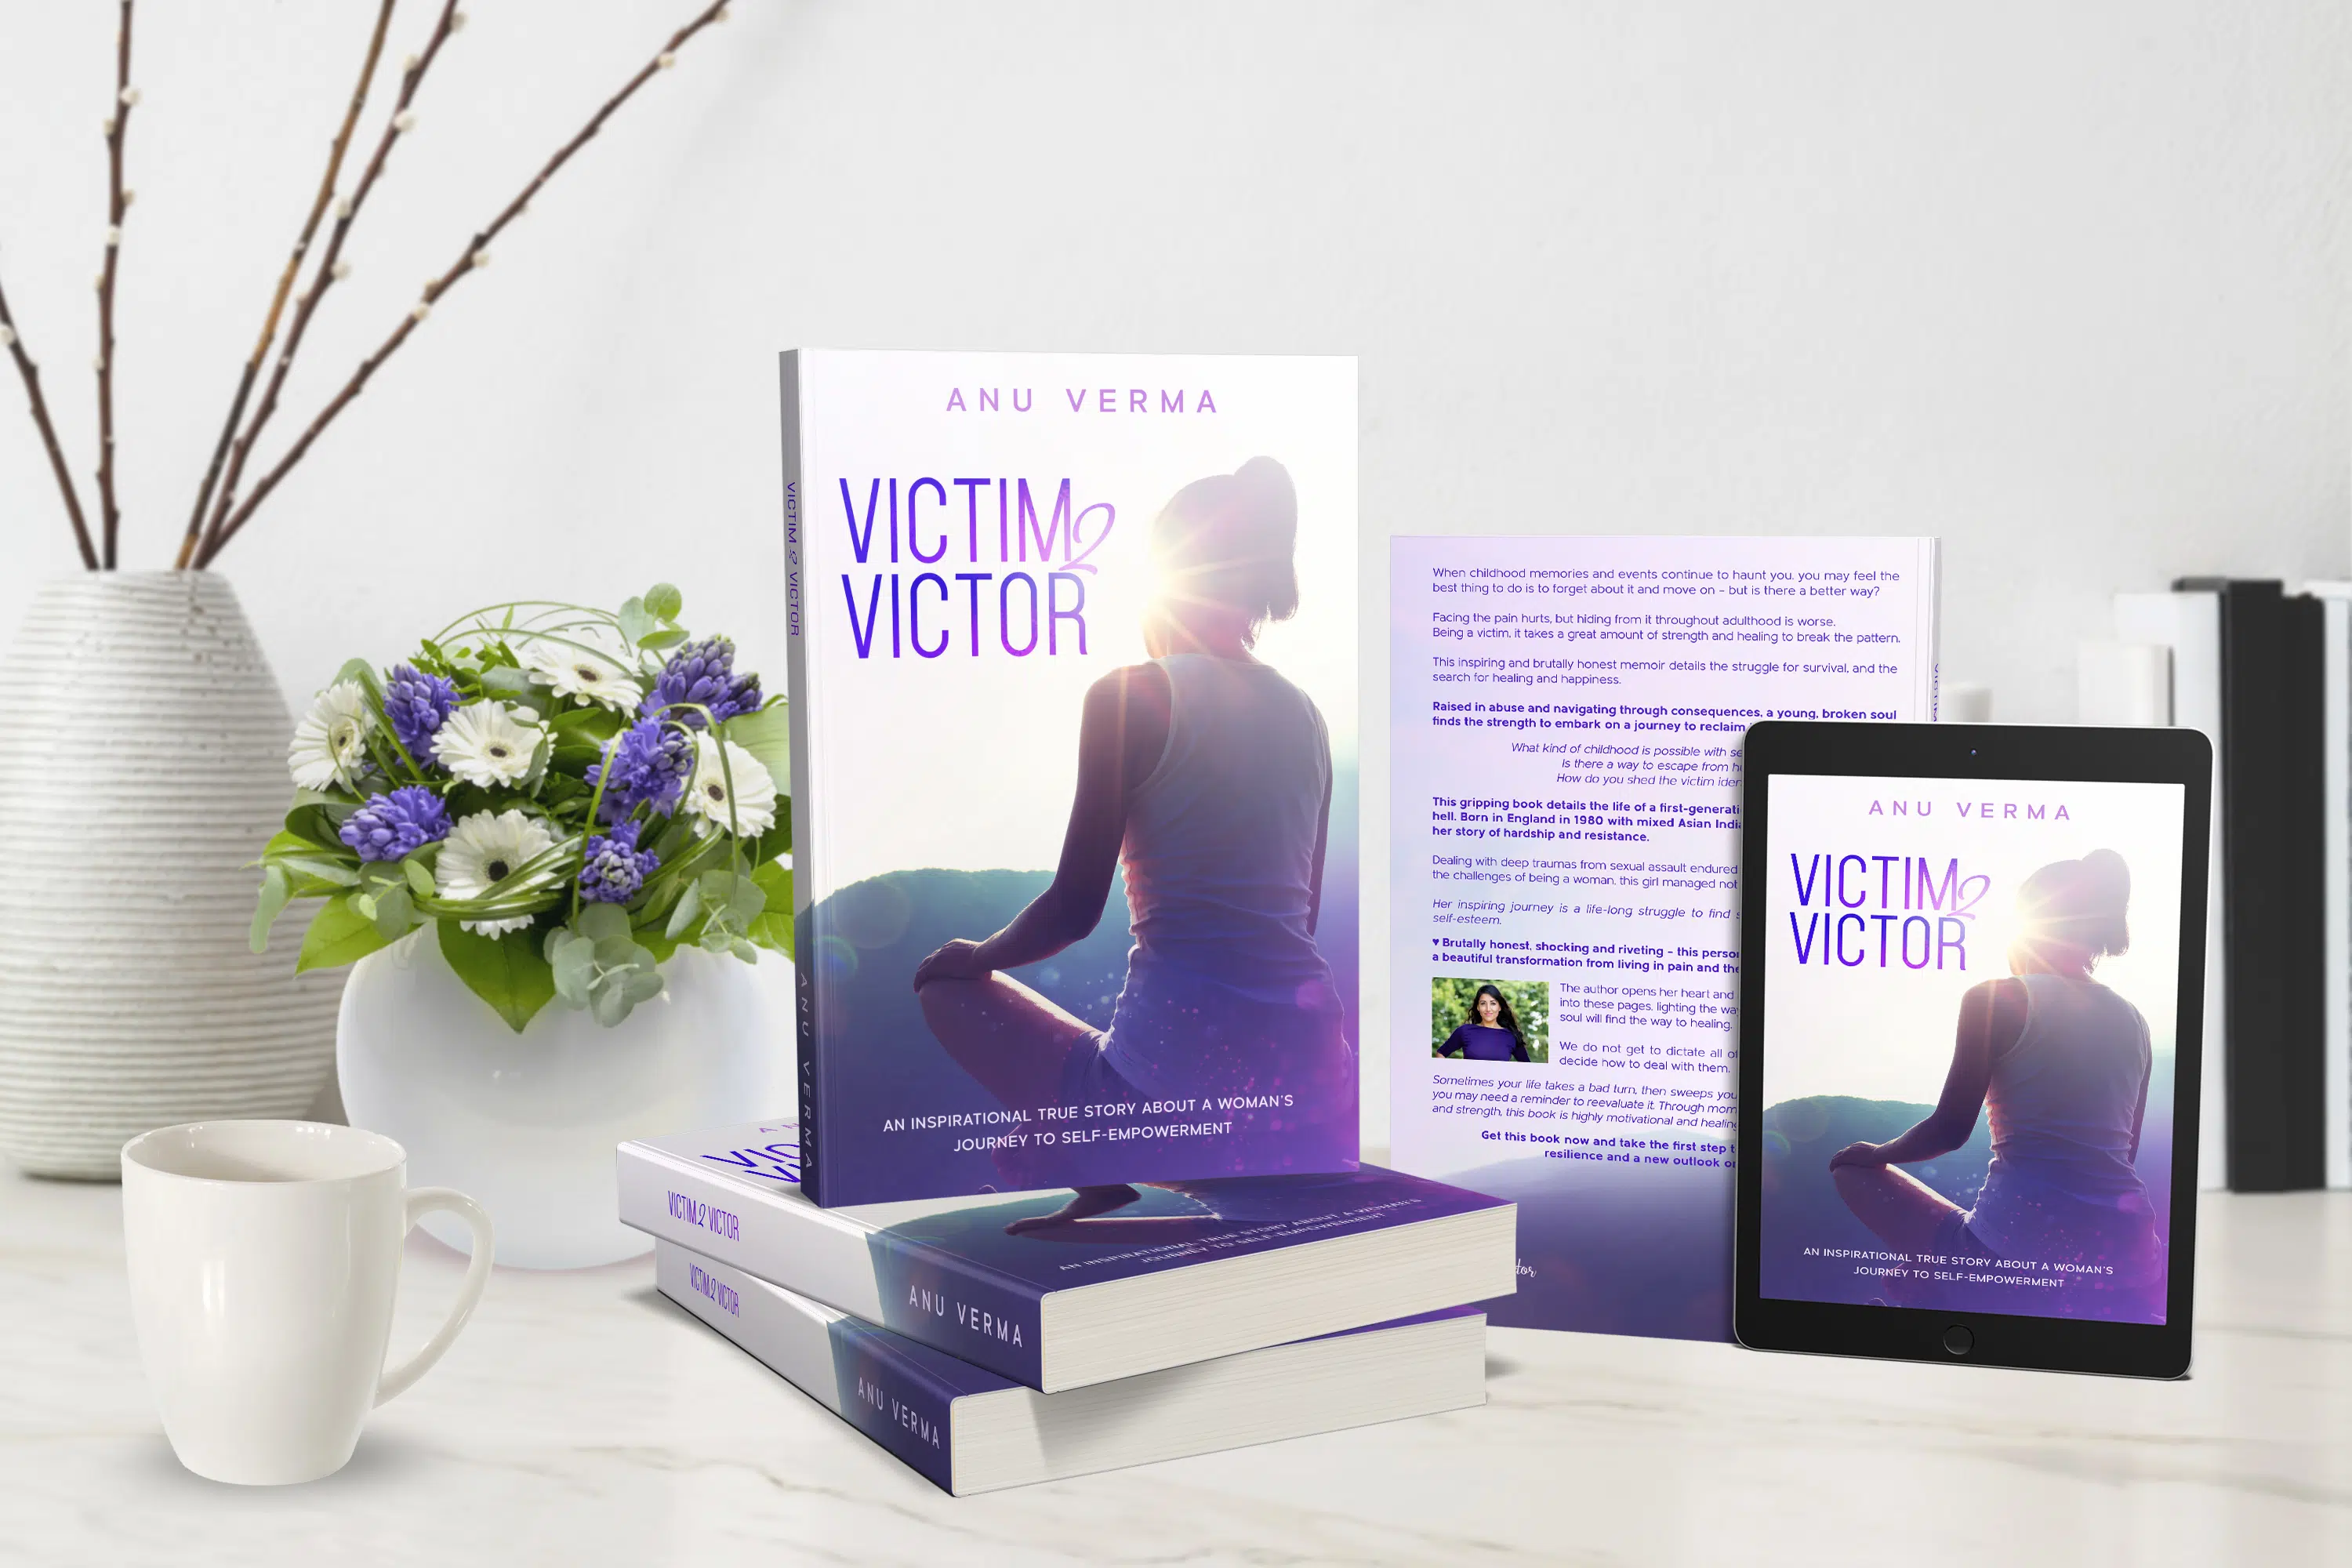 Victim 2 Victor Inspirational True Story of Courageous Women